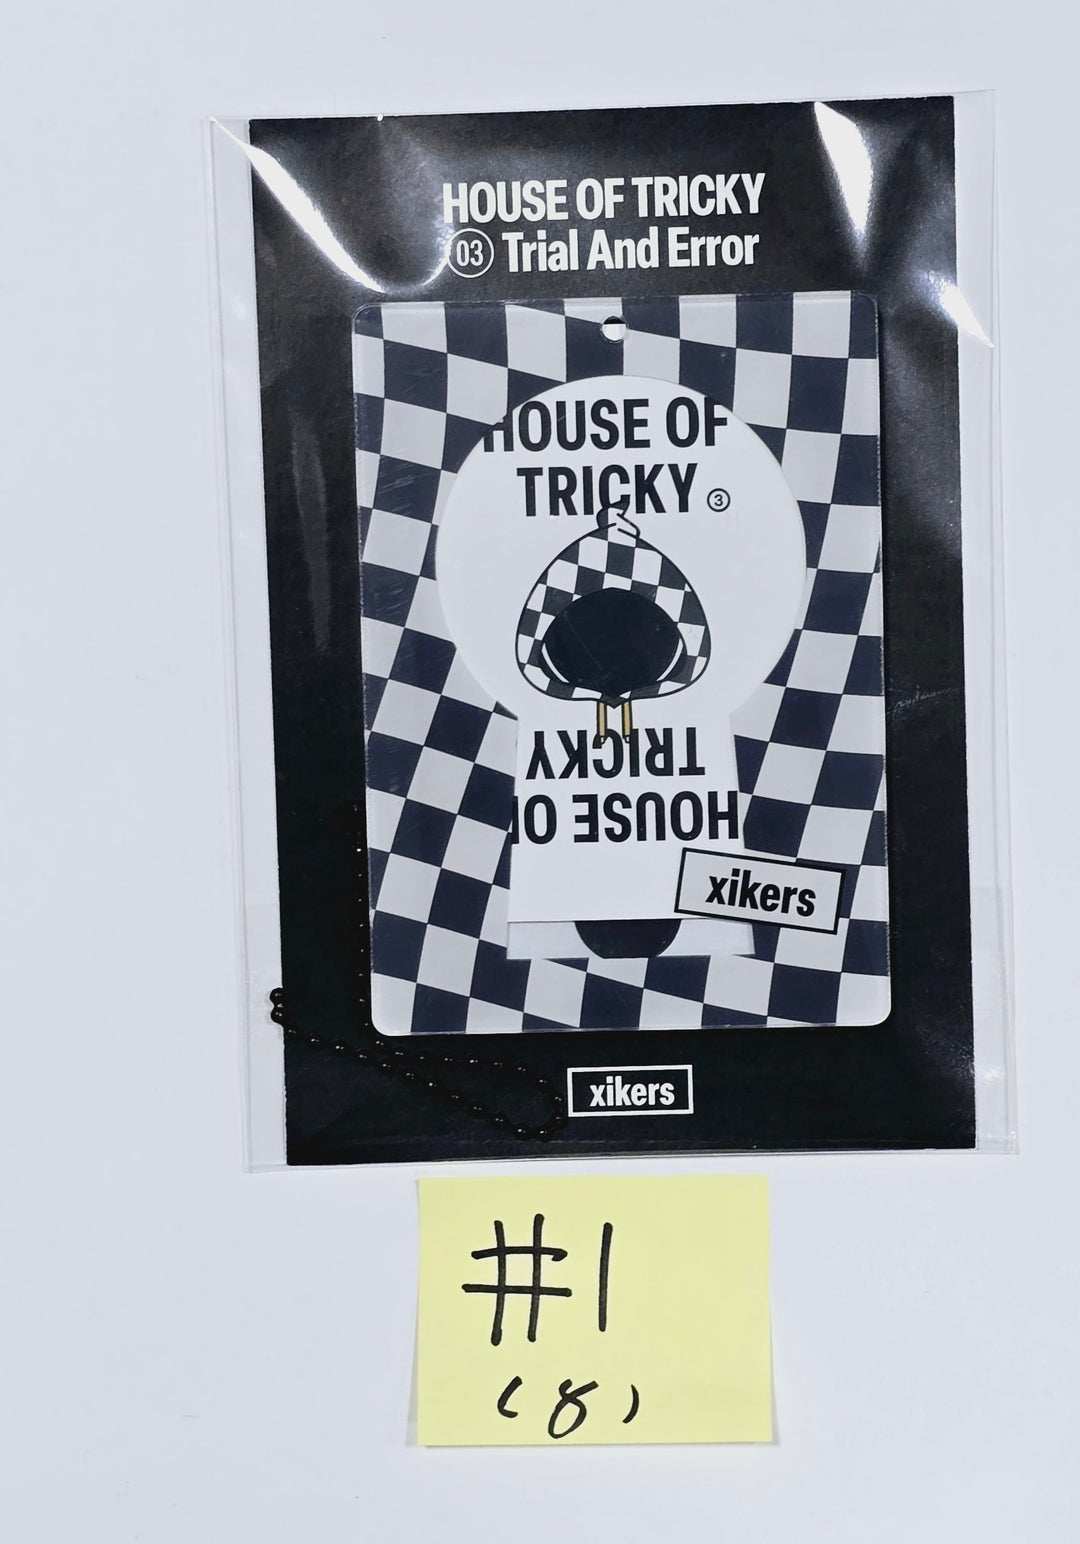 Xikers "HOUSE OF TRICKY : Trial And Error" - Official MD [Acrylic Stand & Sticker, Acrylic Photocard Holder] [24.3.11]